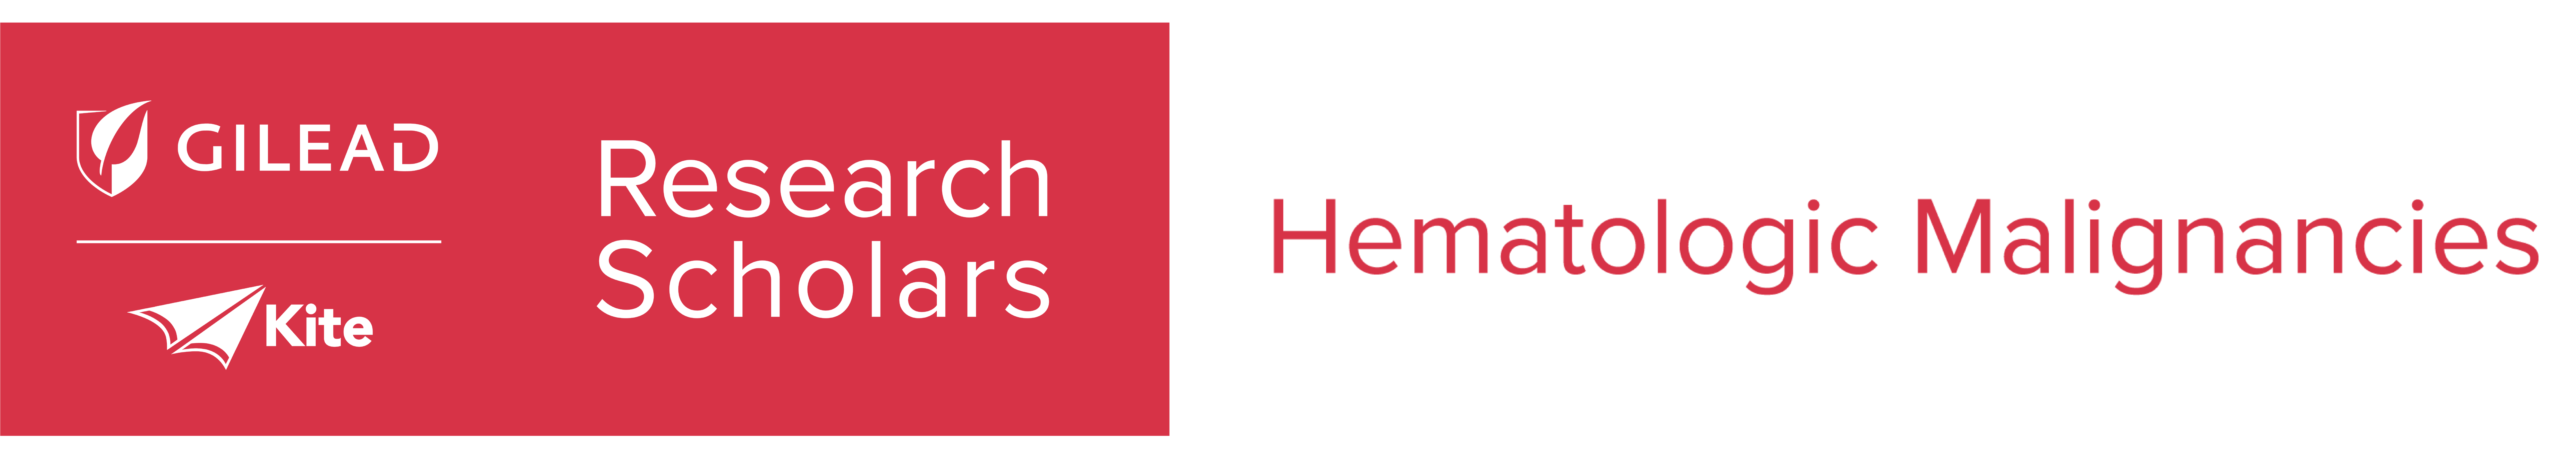 Gilead Sciences Research Scholars Program in Hematology/Oncology